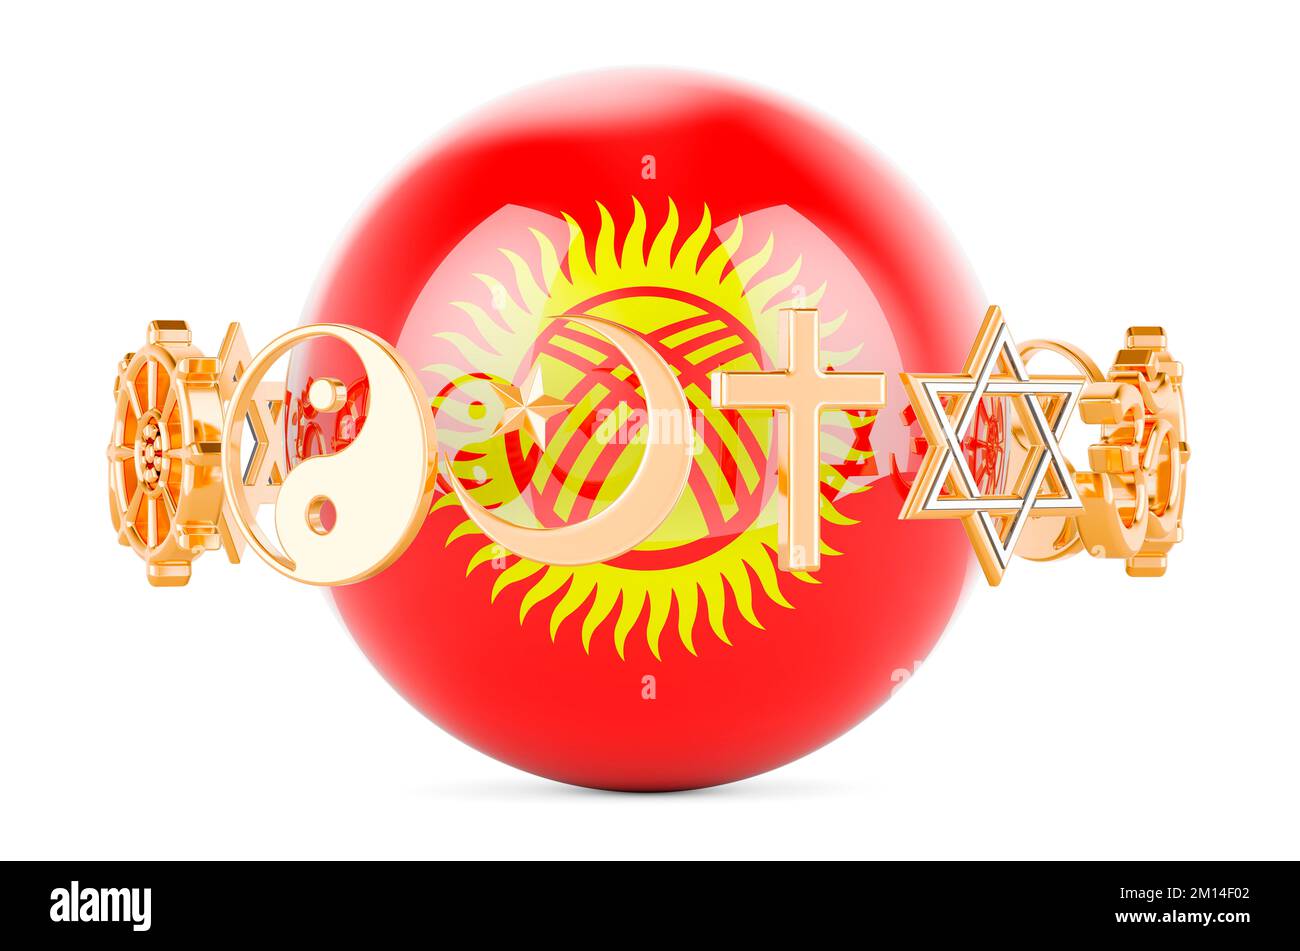 Kyrgyz flag painted on sphere with religions symbols around, 3D rendering isolated on white background Stock Photo